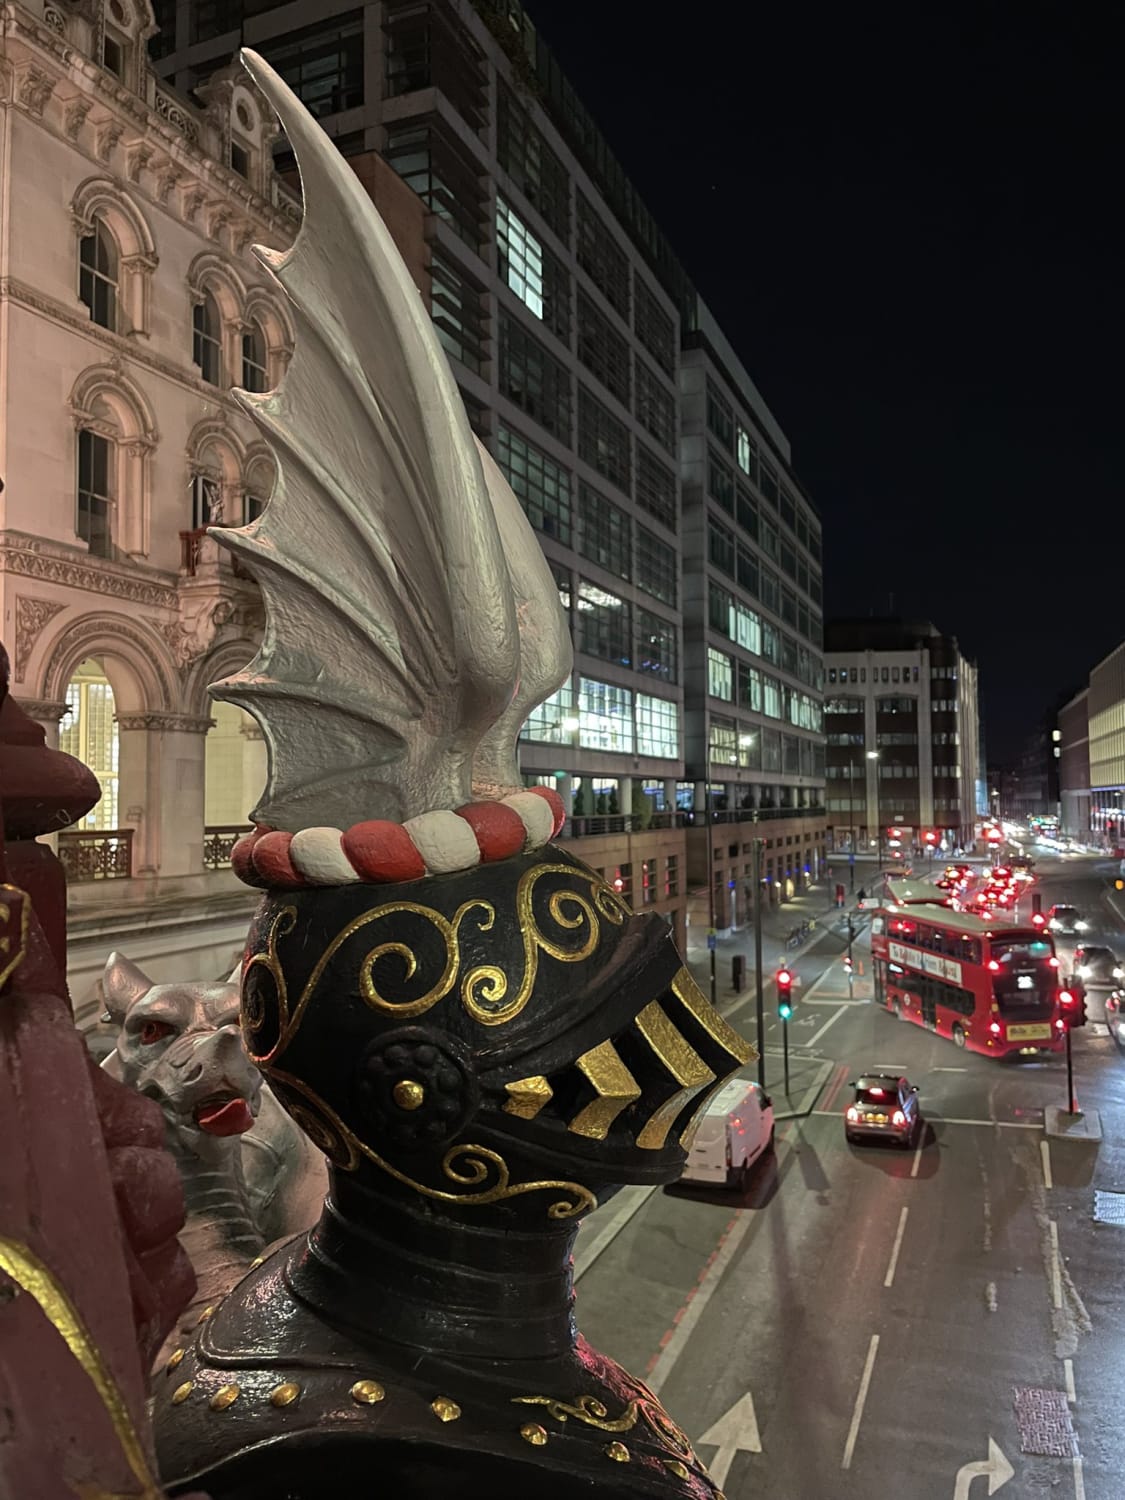 A brilliantly decorated winged helm and a silver City of London dragon with flame red tongue watch over those travelling below the Holborn Viaduct.